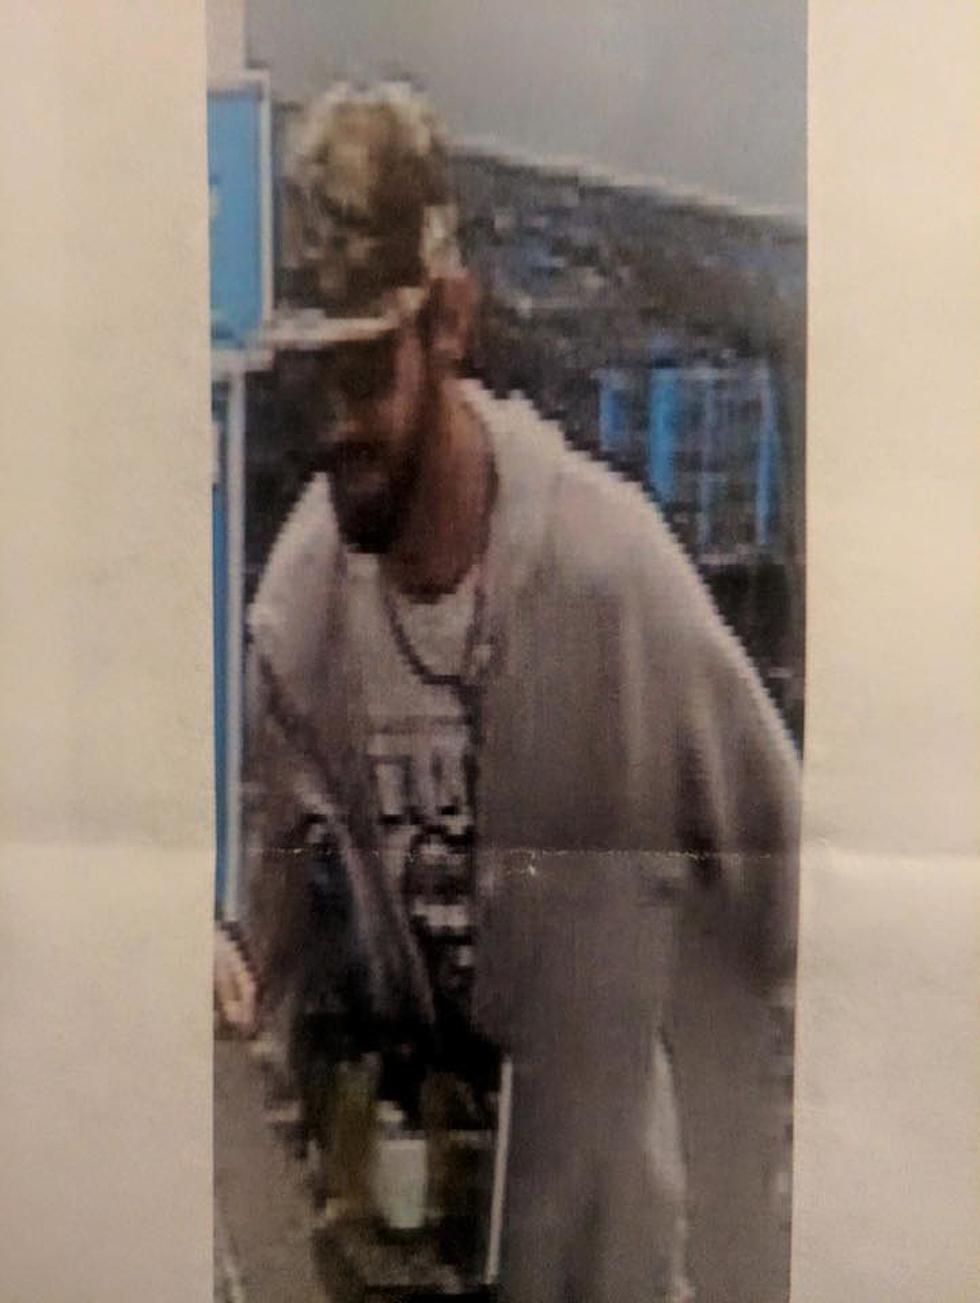 Have You Seen This Alleged Kennewick Walmart Thief?